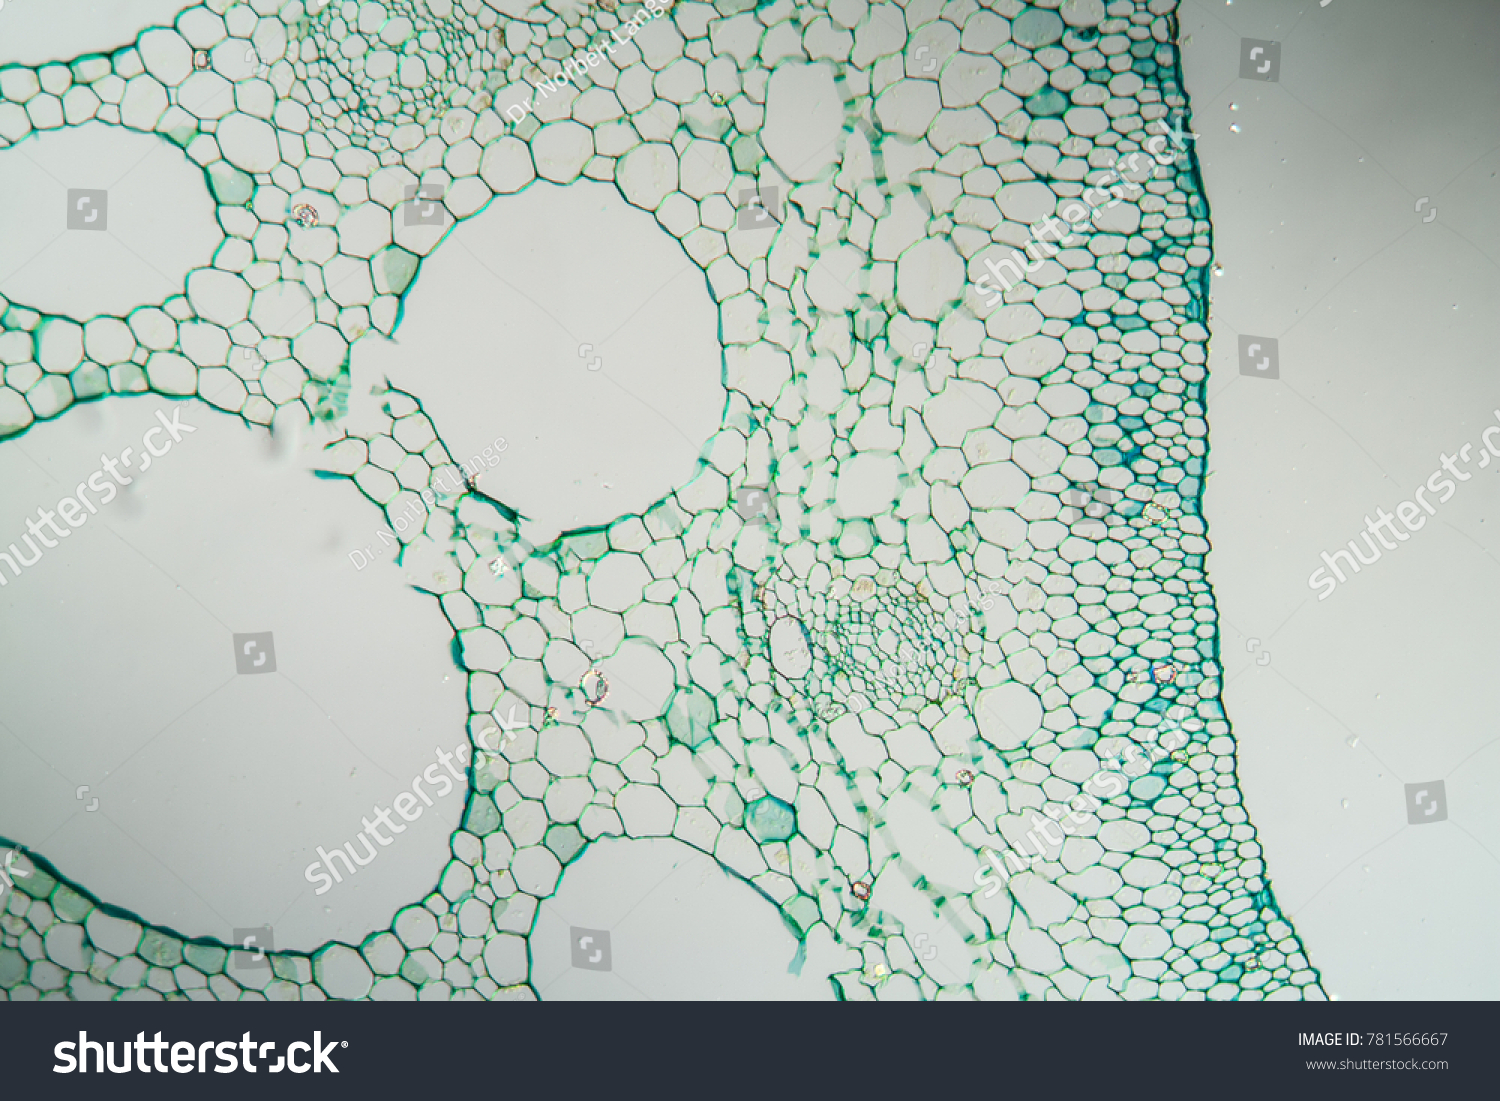 water lily leaf cross section